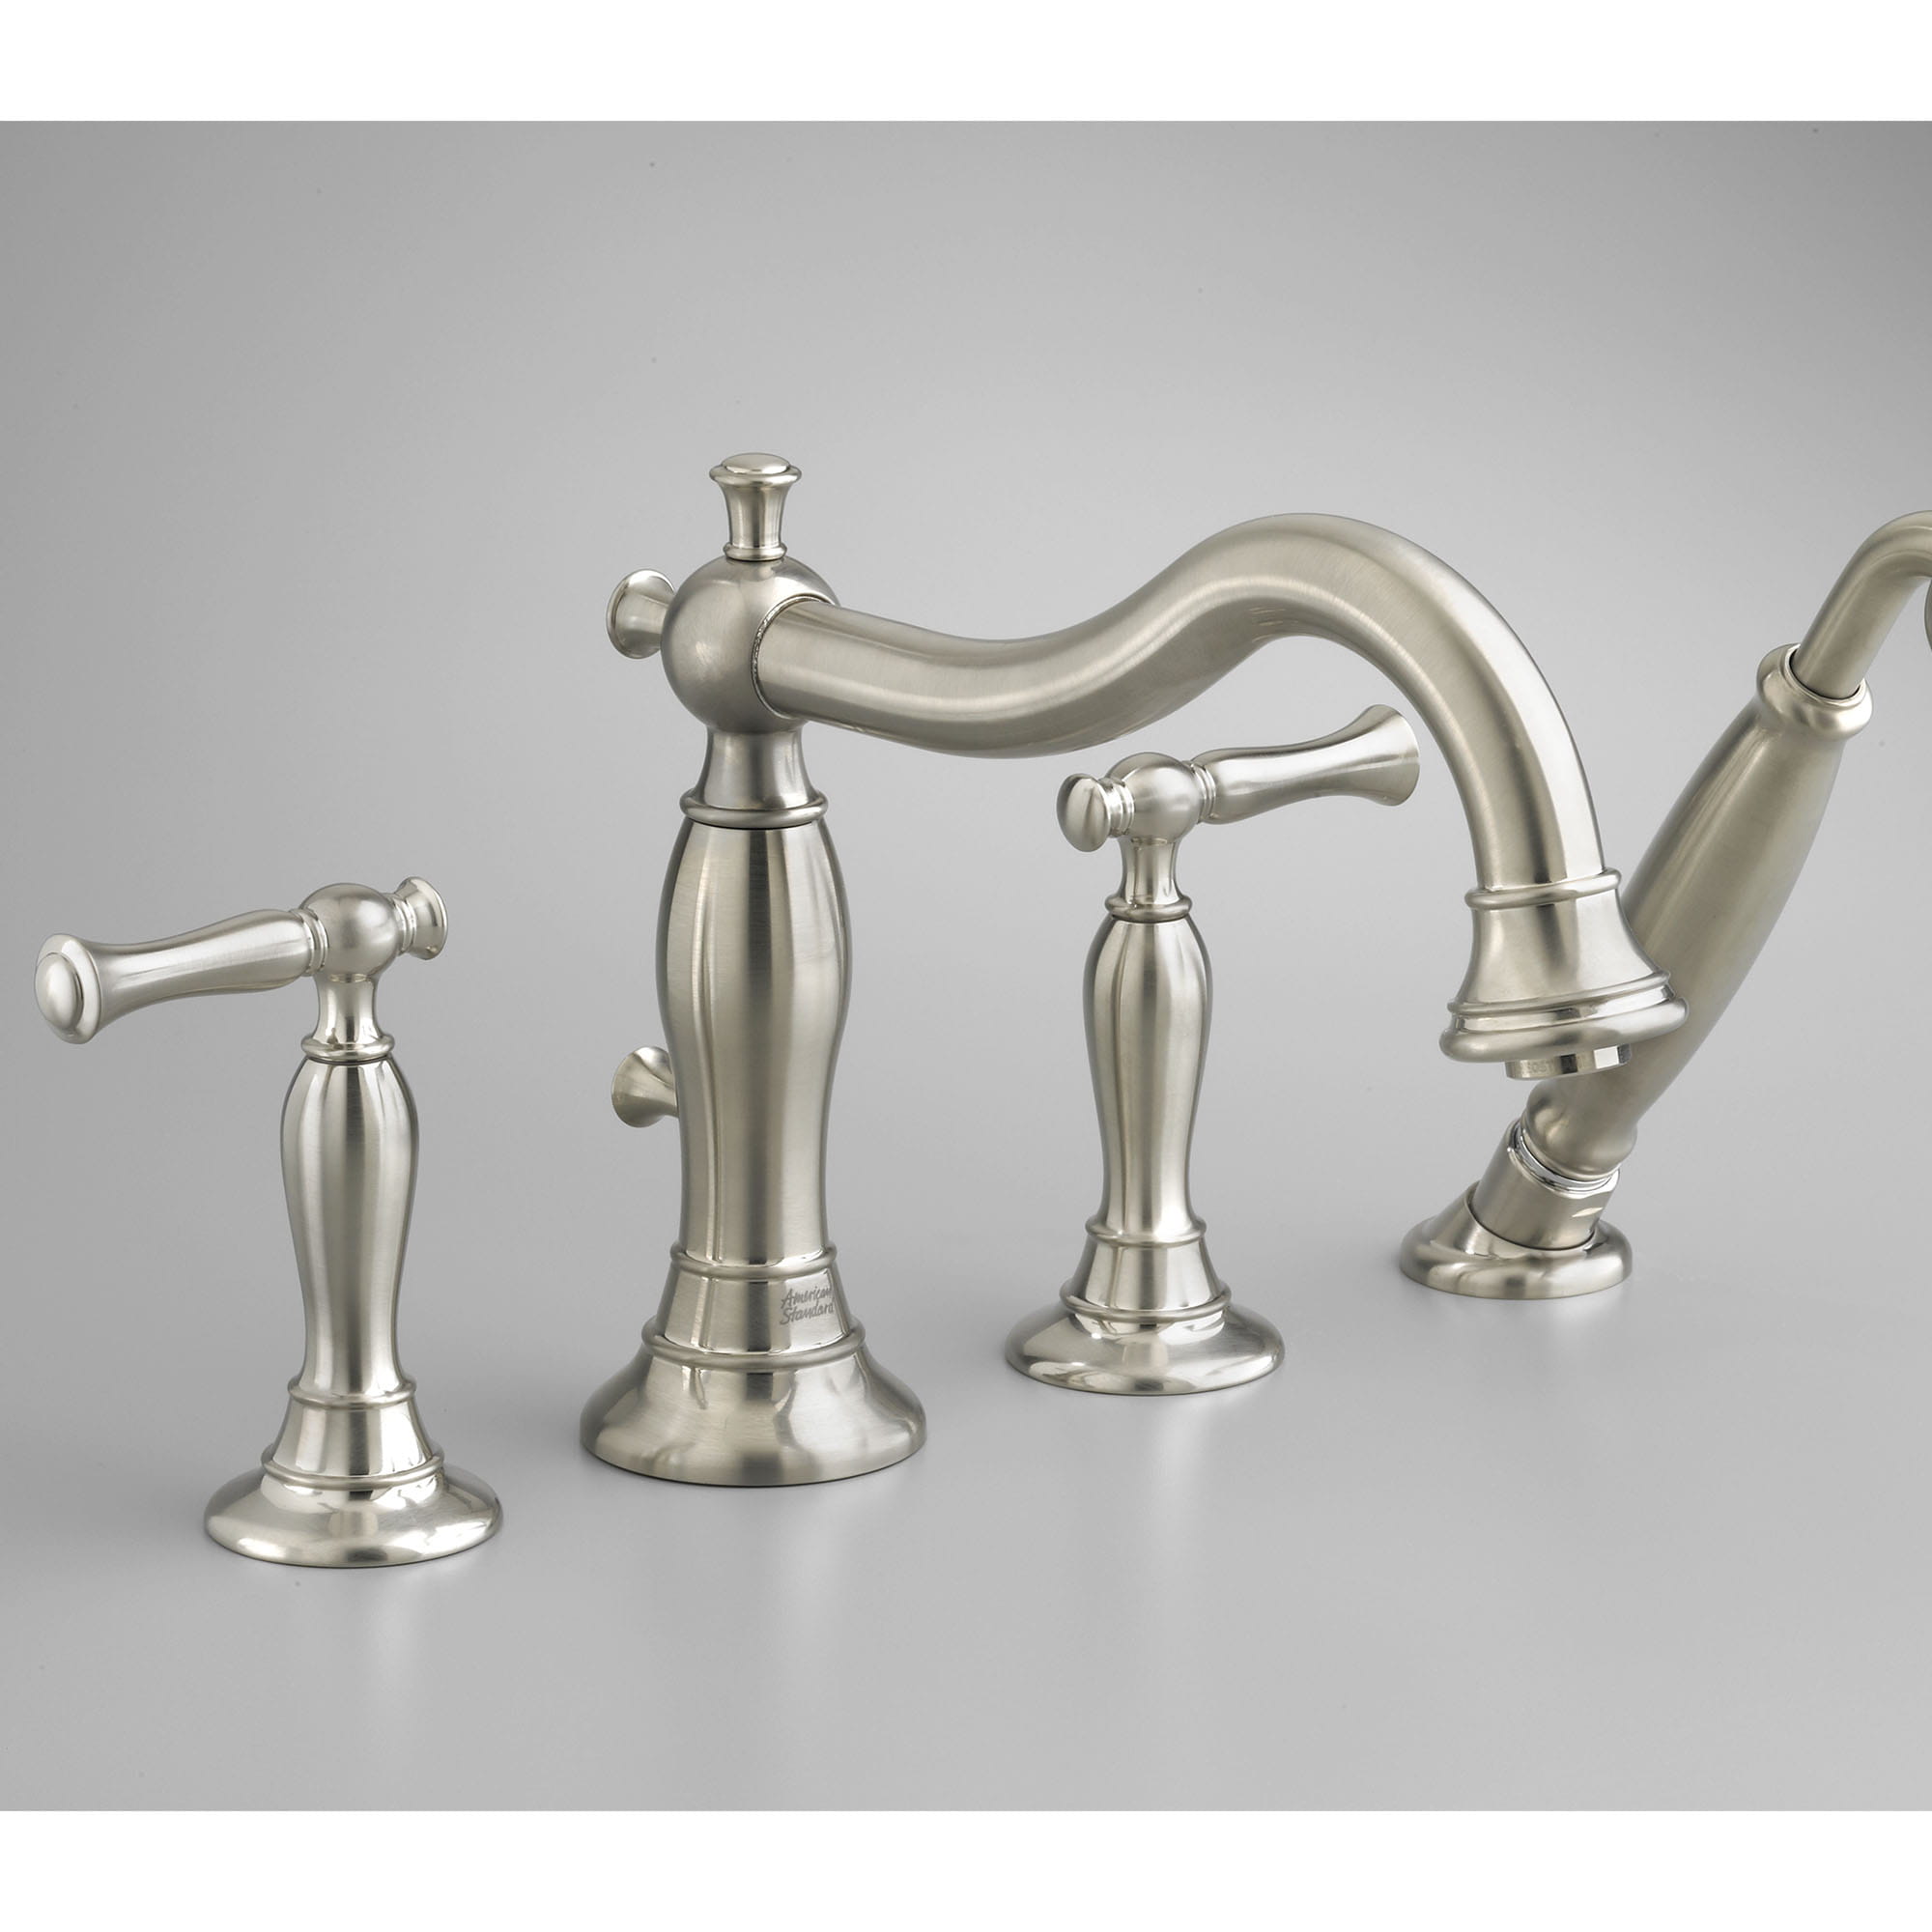 Quentin Bathtub Faucet for Flash Rough-in Valve with Lever Handles